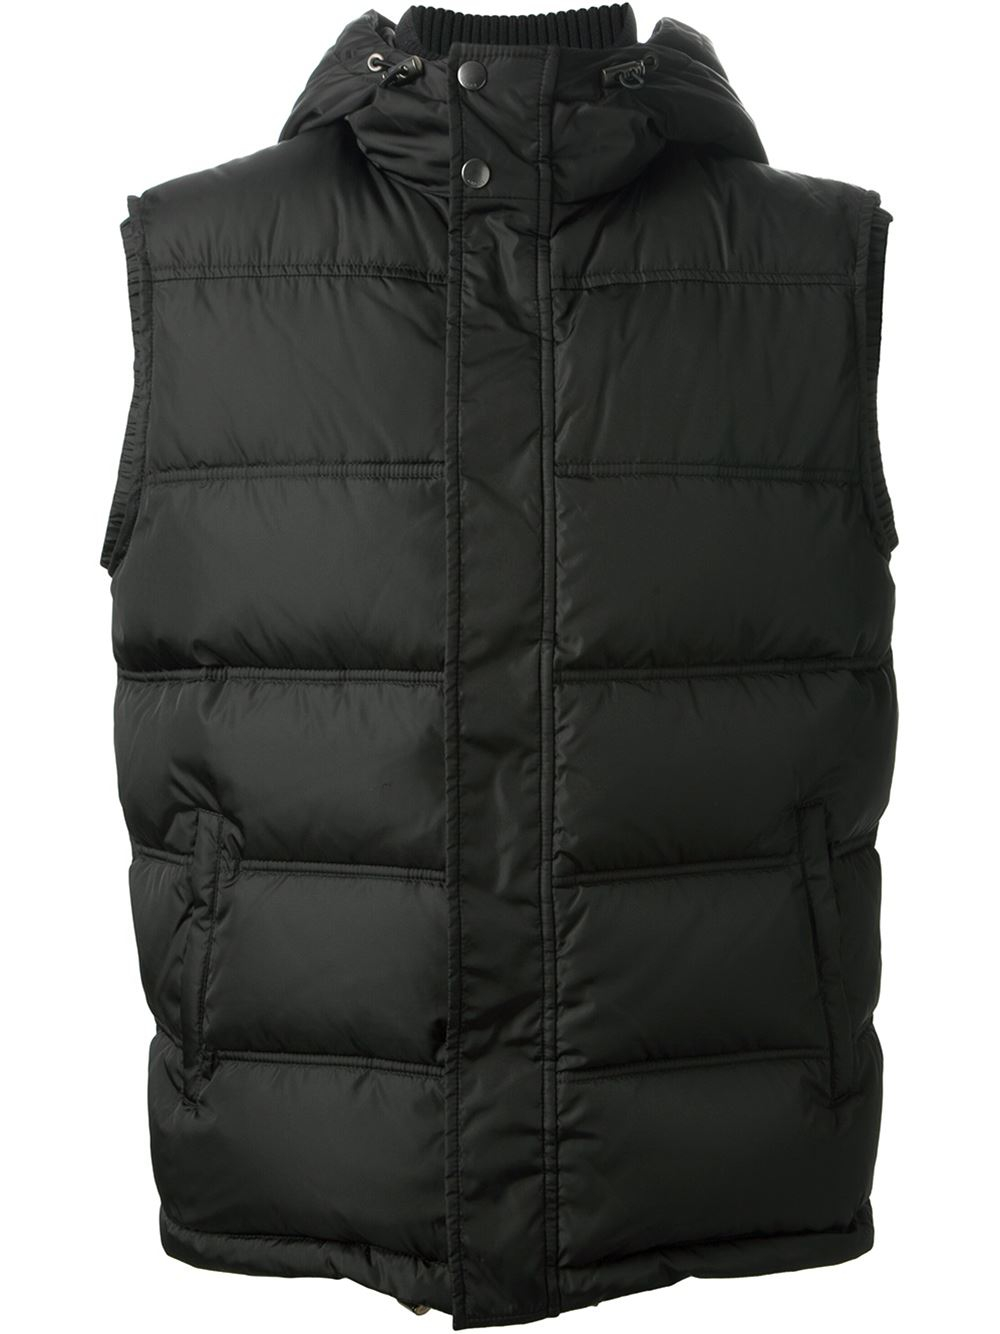 Lyst - Gucci Padded Gilet in Black for Men